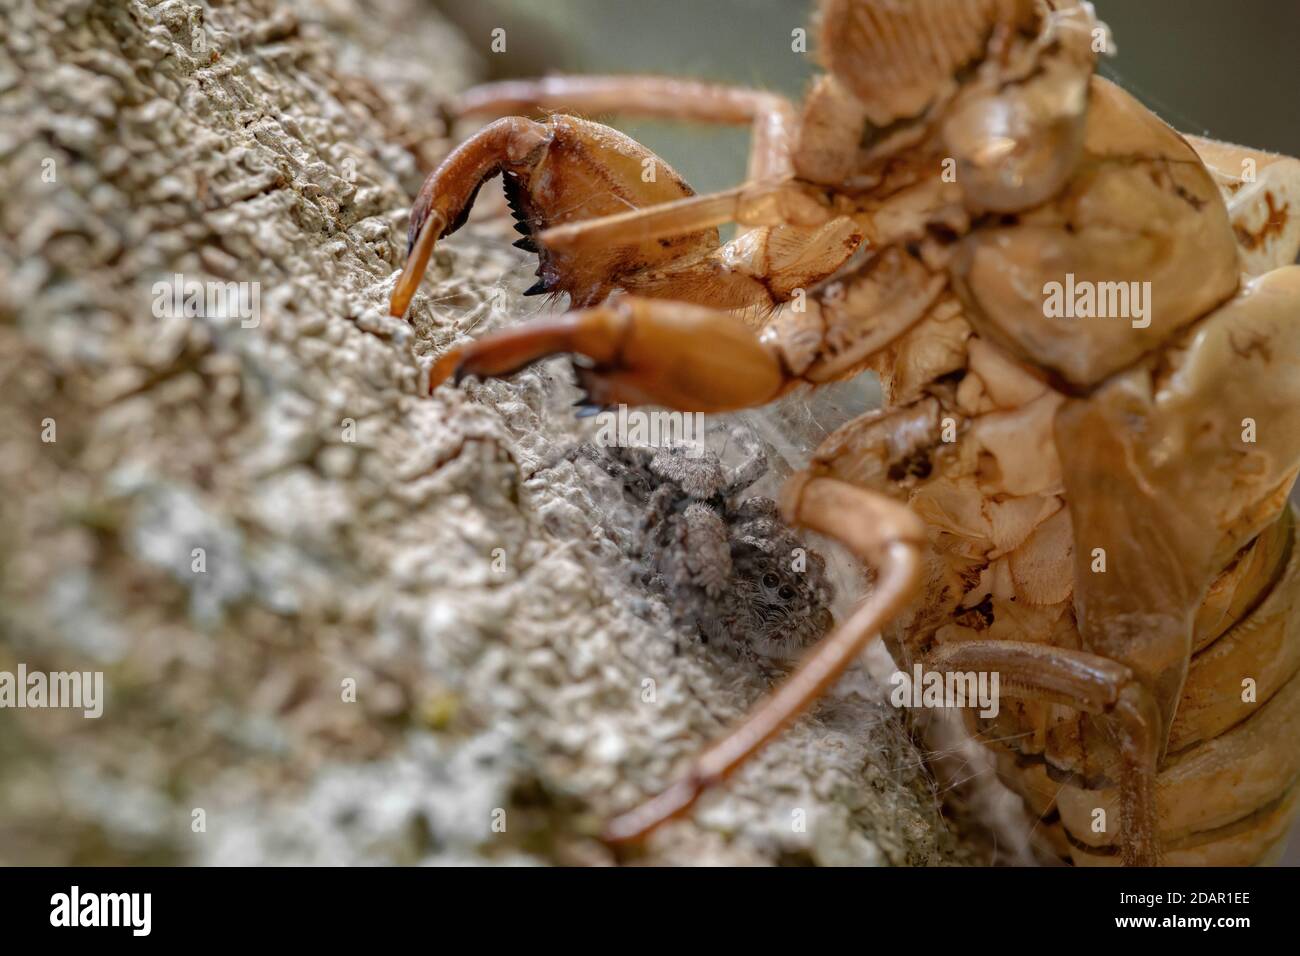 Couple of jumping spiders of the species Platycryptus magnus below a cicada exuvia Stock Photo